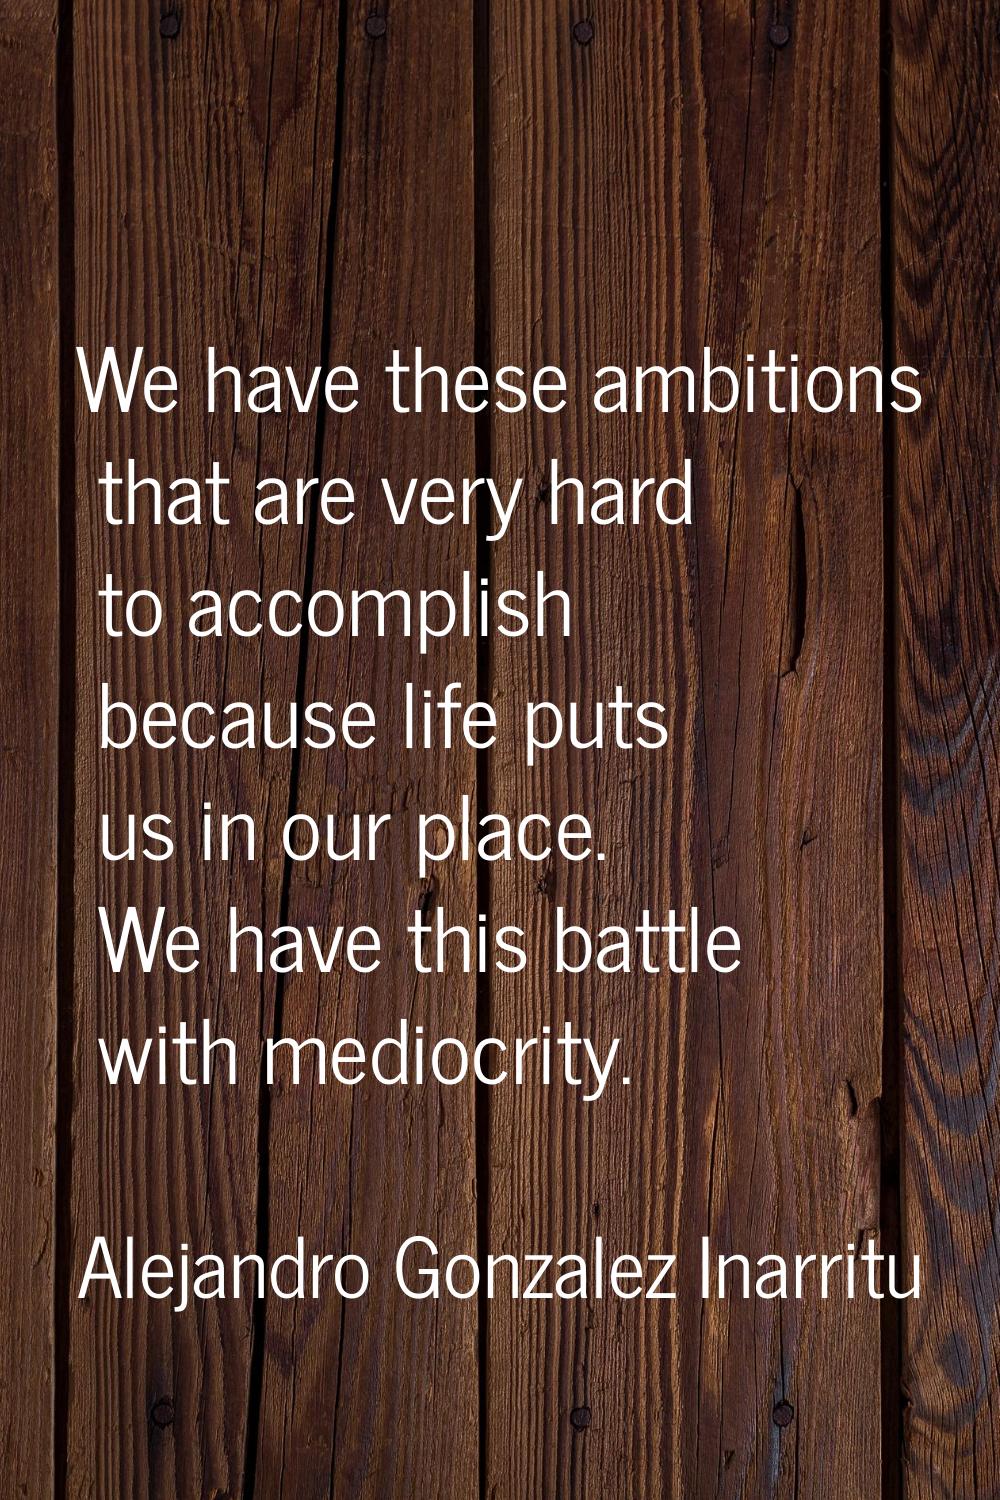 We have these ambitions that are very hard to accomplish because life puts us in our place. We have